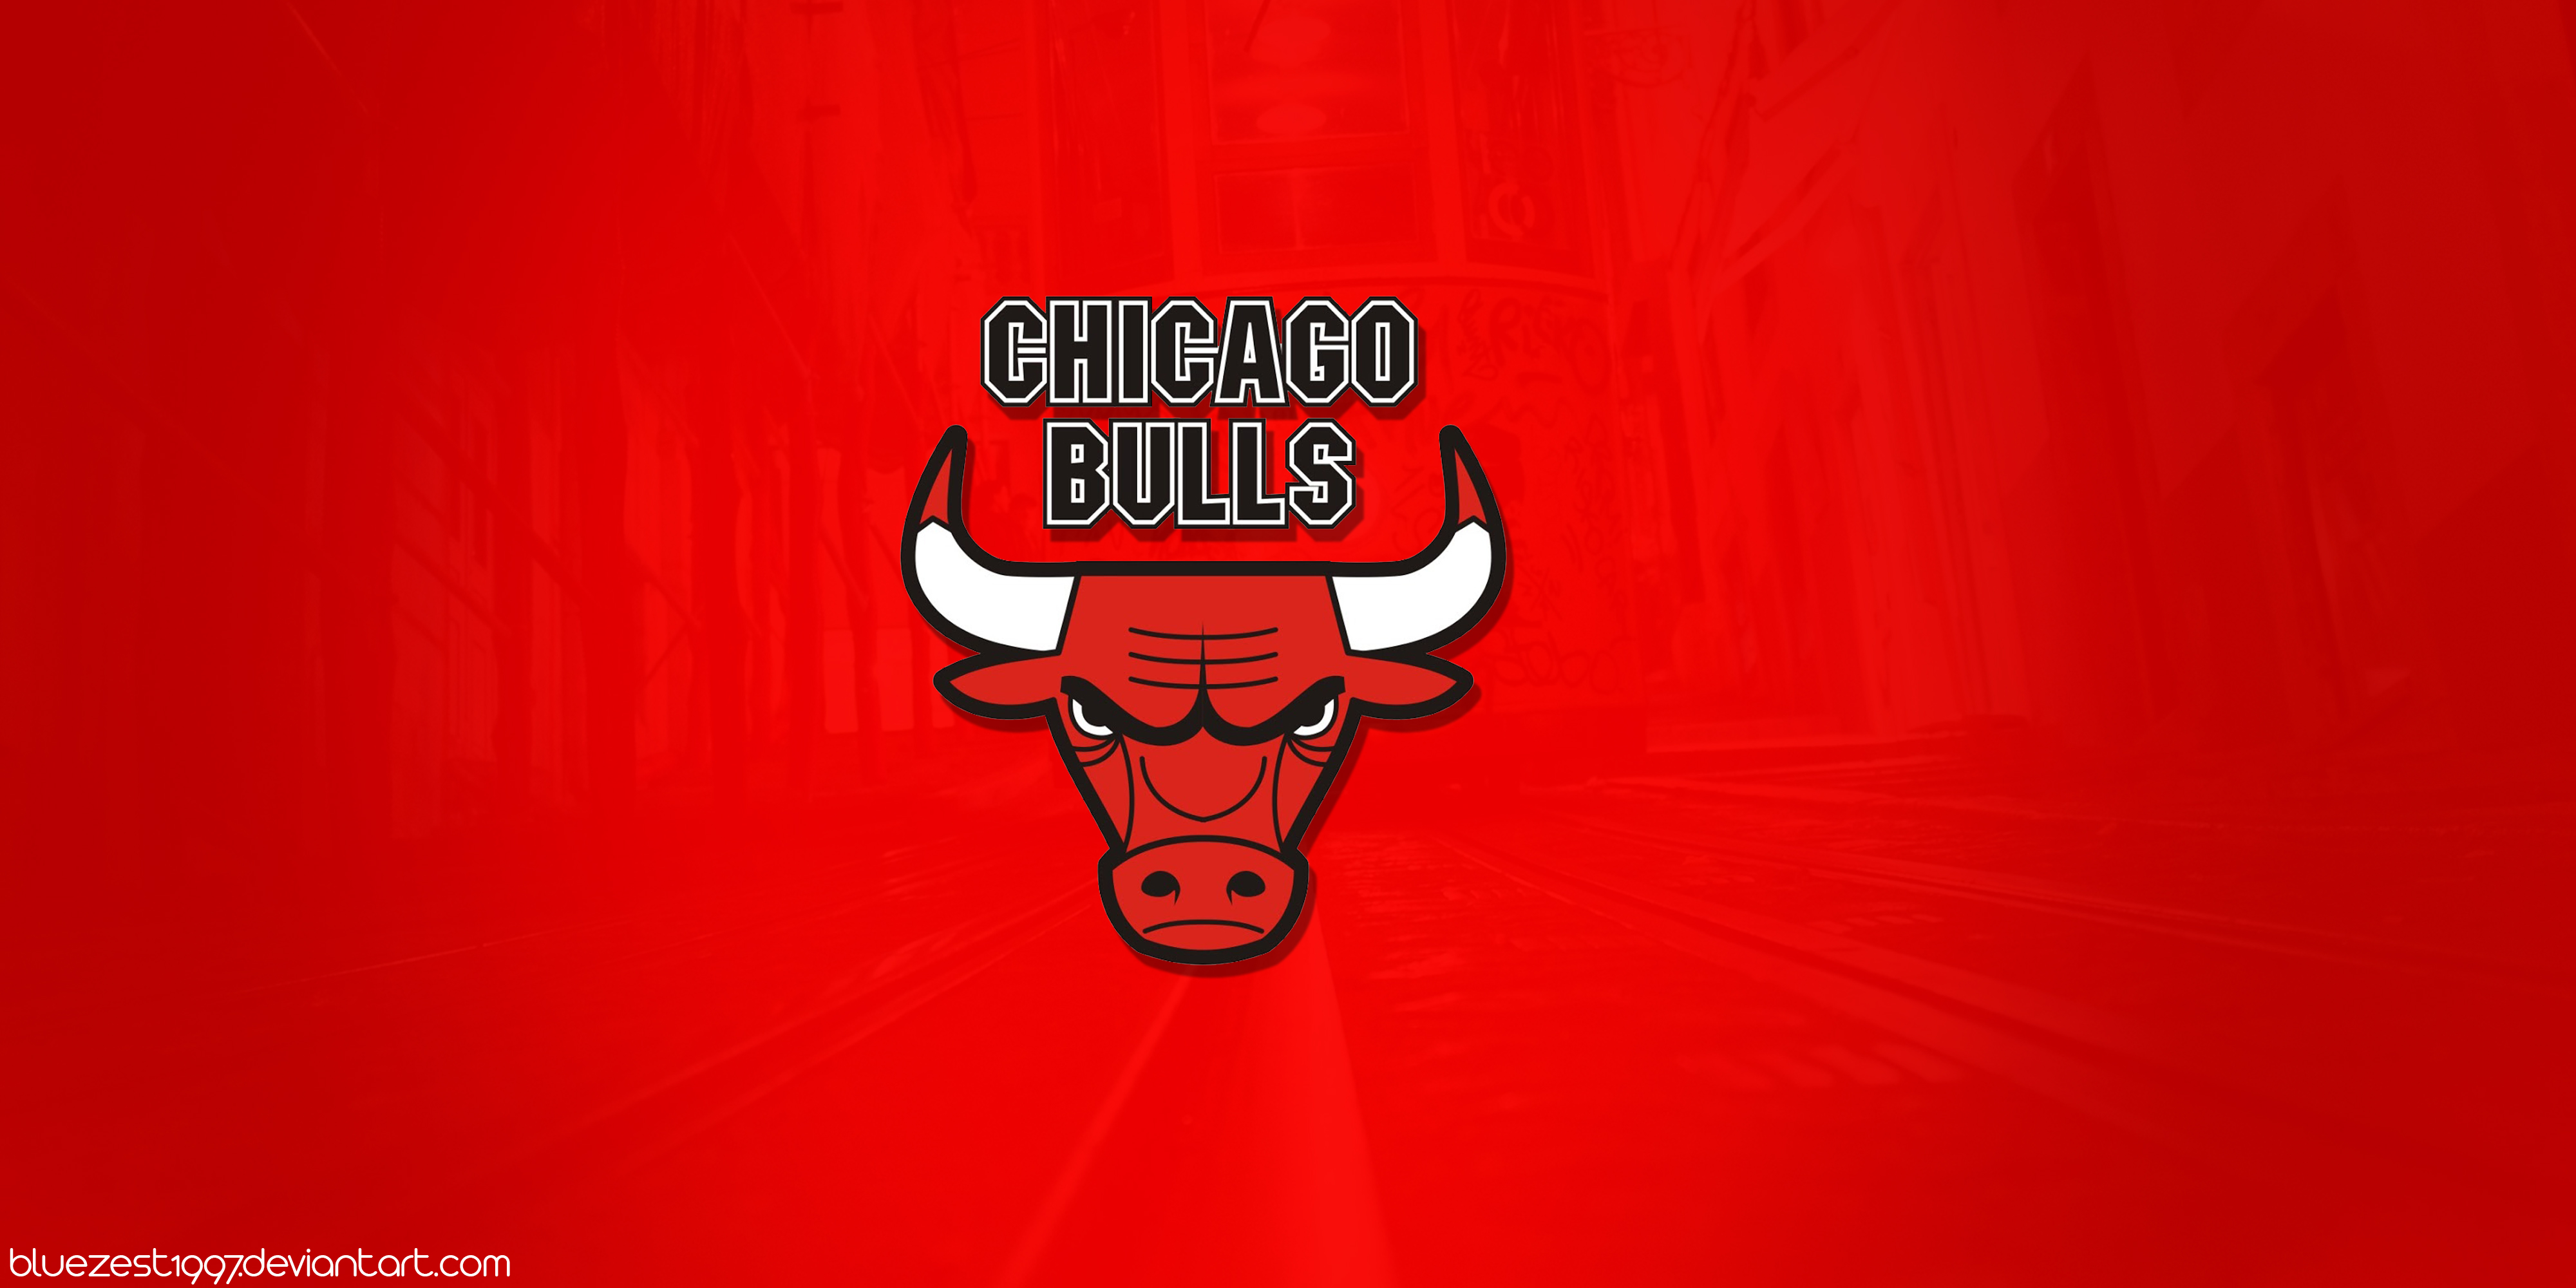 Chicago Bulls Wallpaper by bluezest1997 on